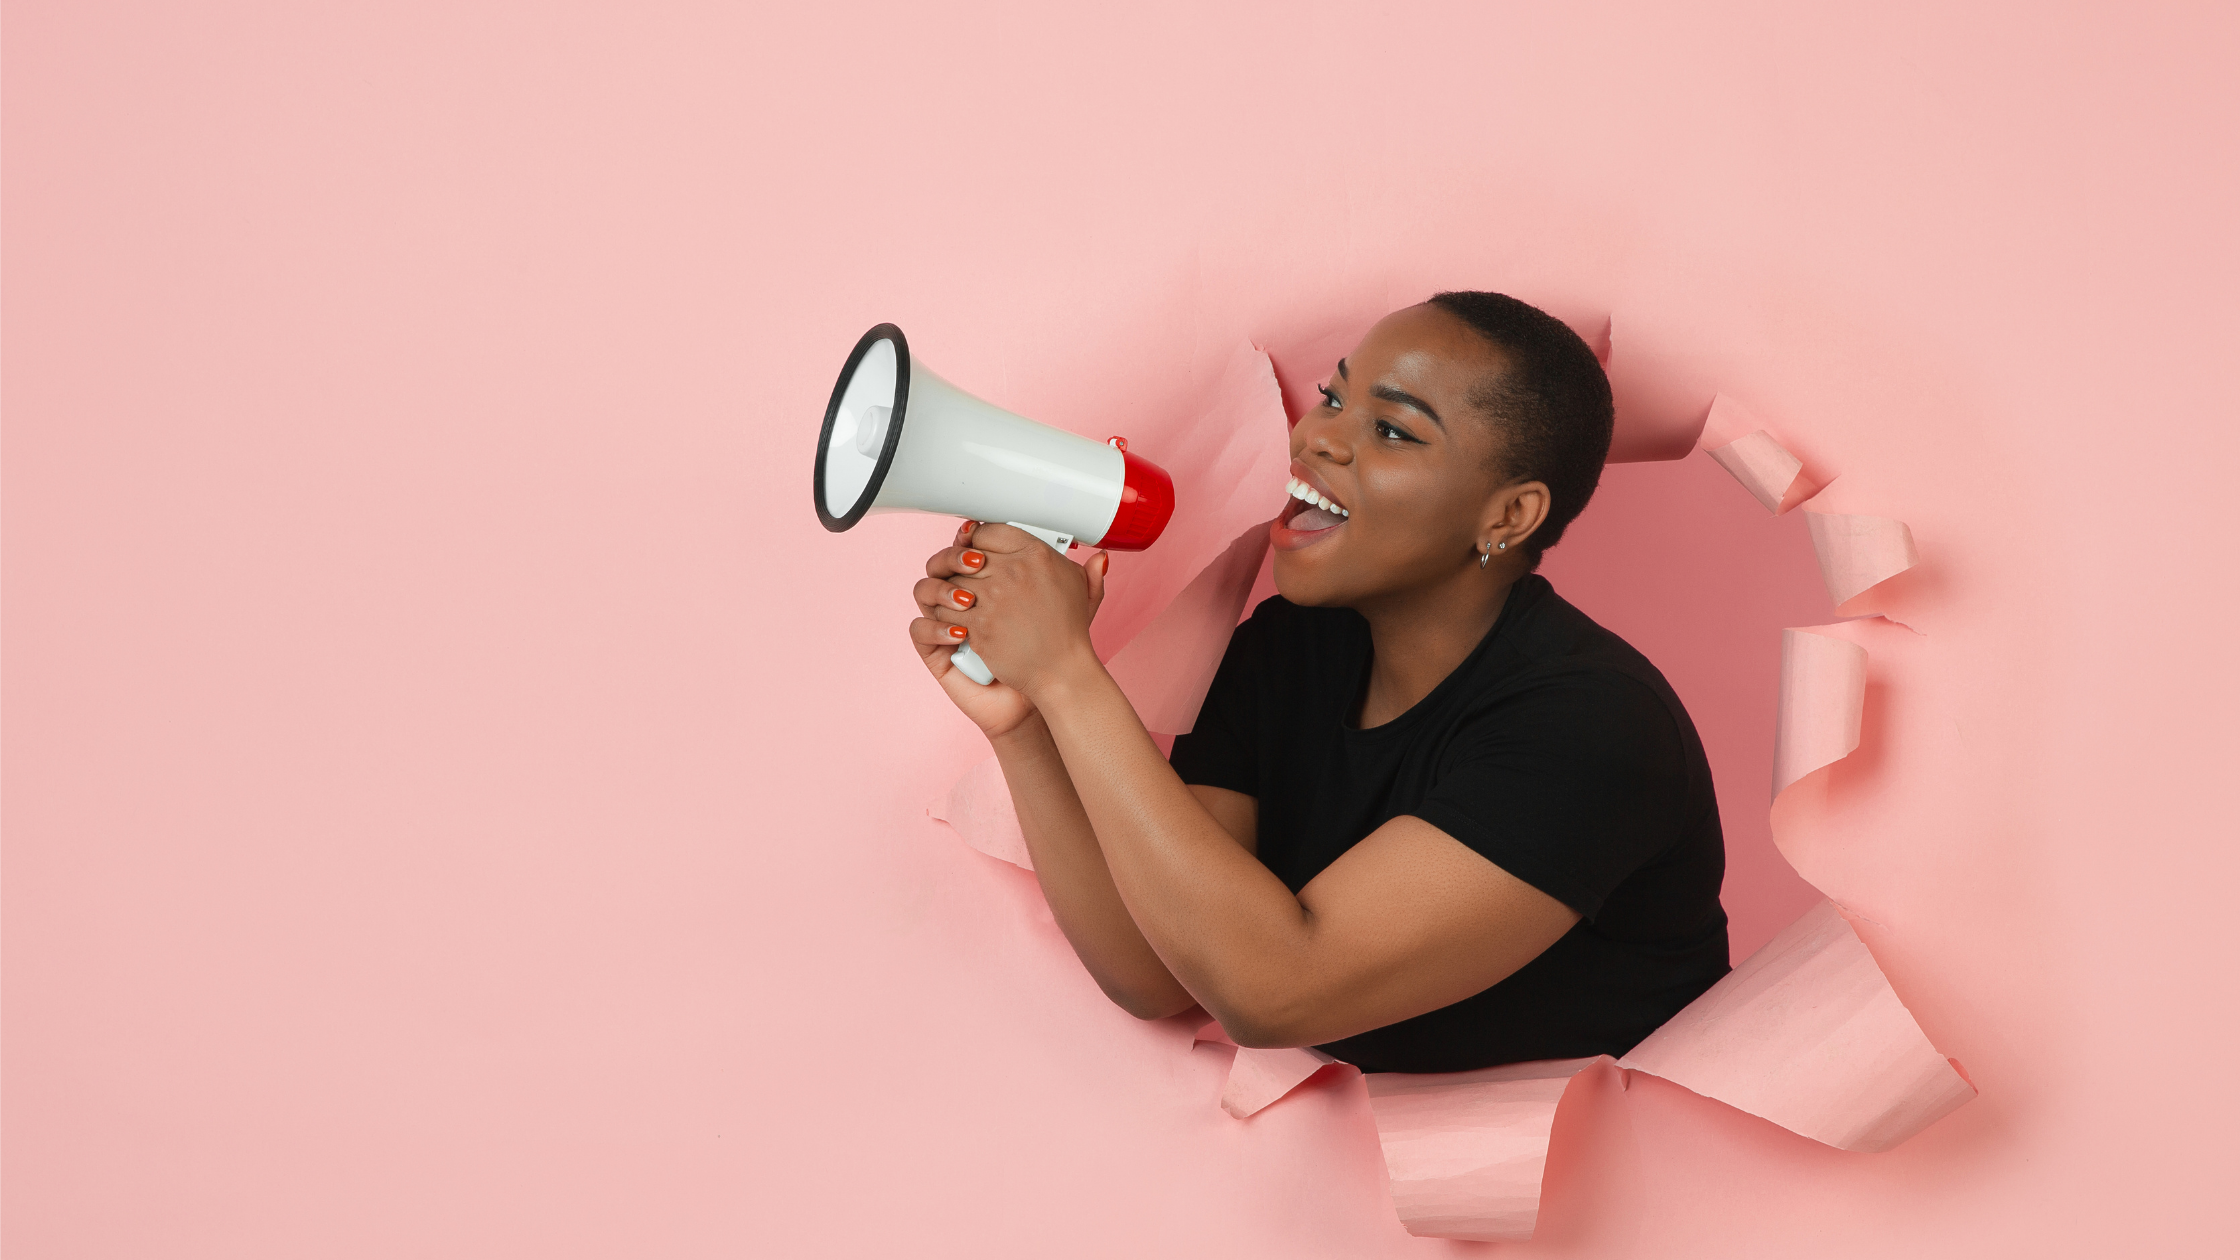 A black woman bursting through a pink background with a megaphone